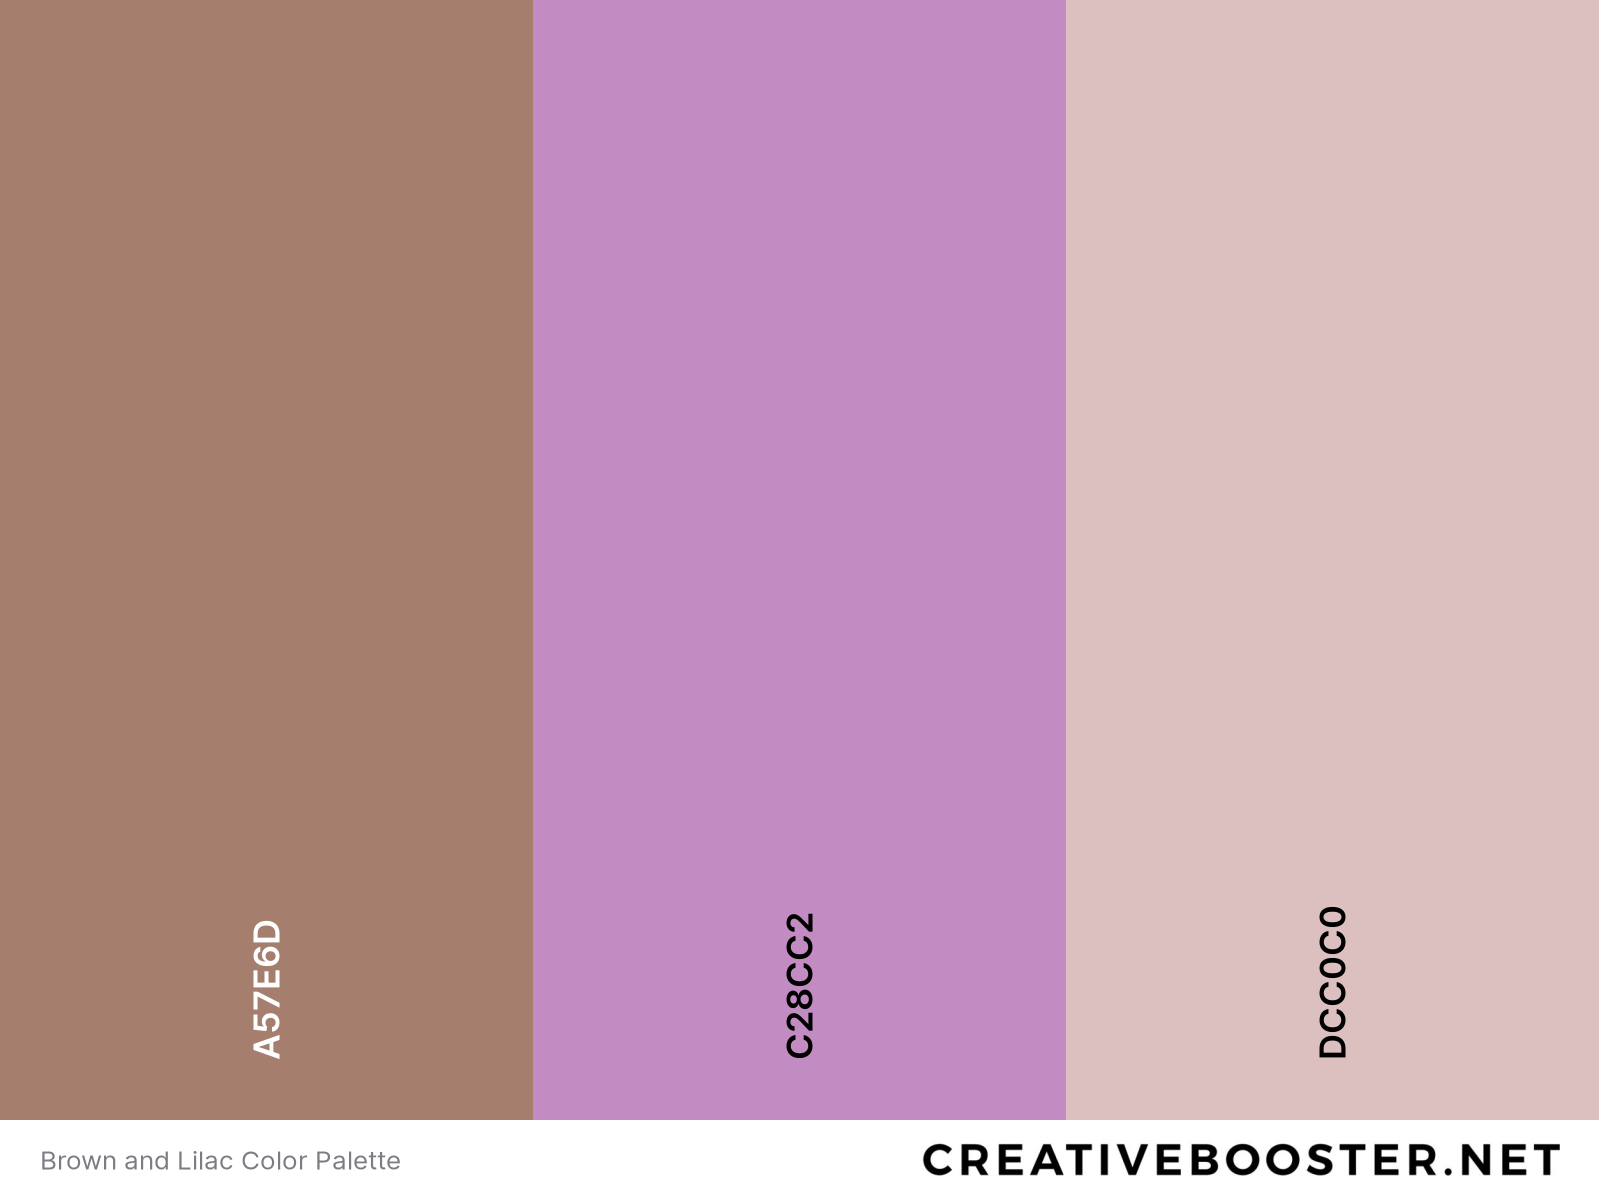 Brown and Lilac Color Palette